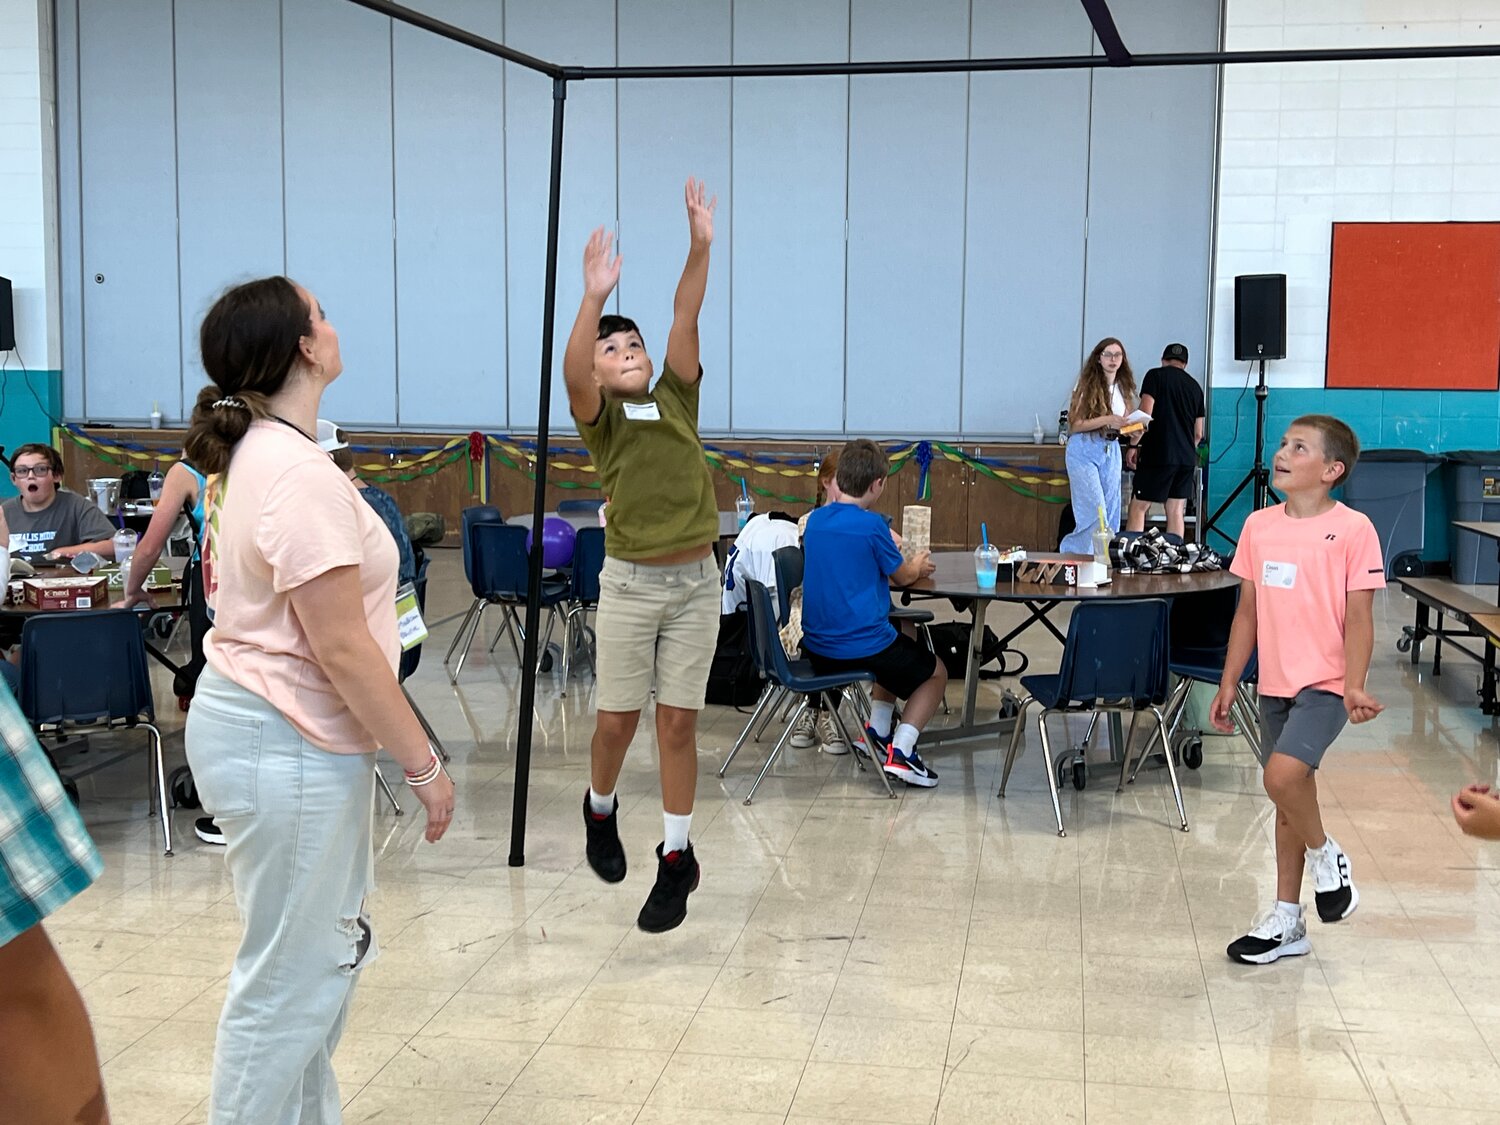 The Bethel After-School Program, which launched Sept. 13, provides games, art, conversation and other activities from 12:30-4 p.m. every Wednesday in part of Olympic School. (Photo: Brian Mittge)